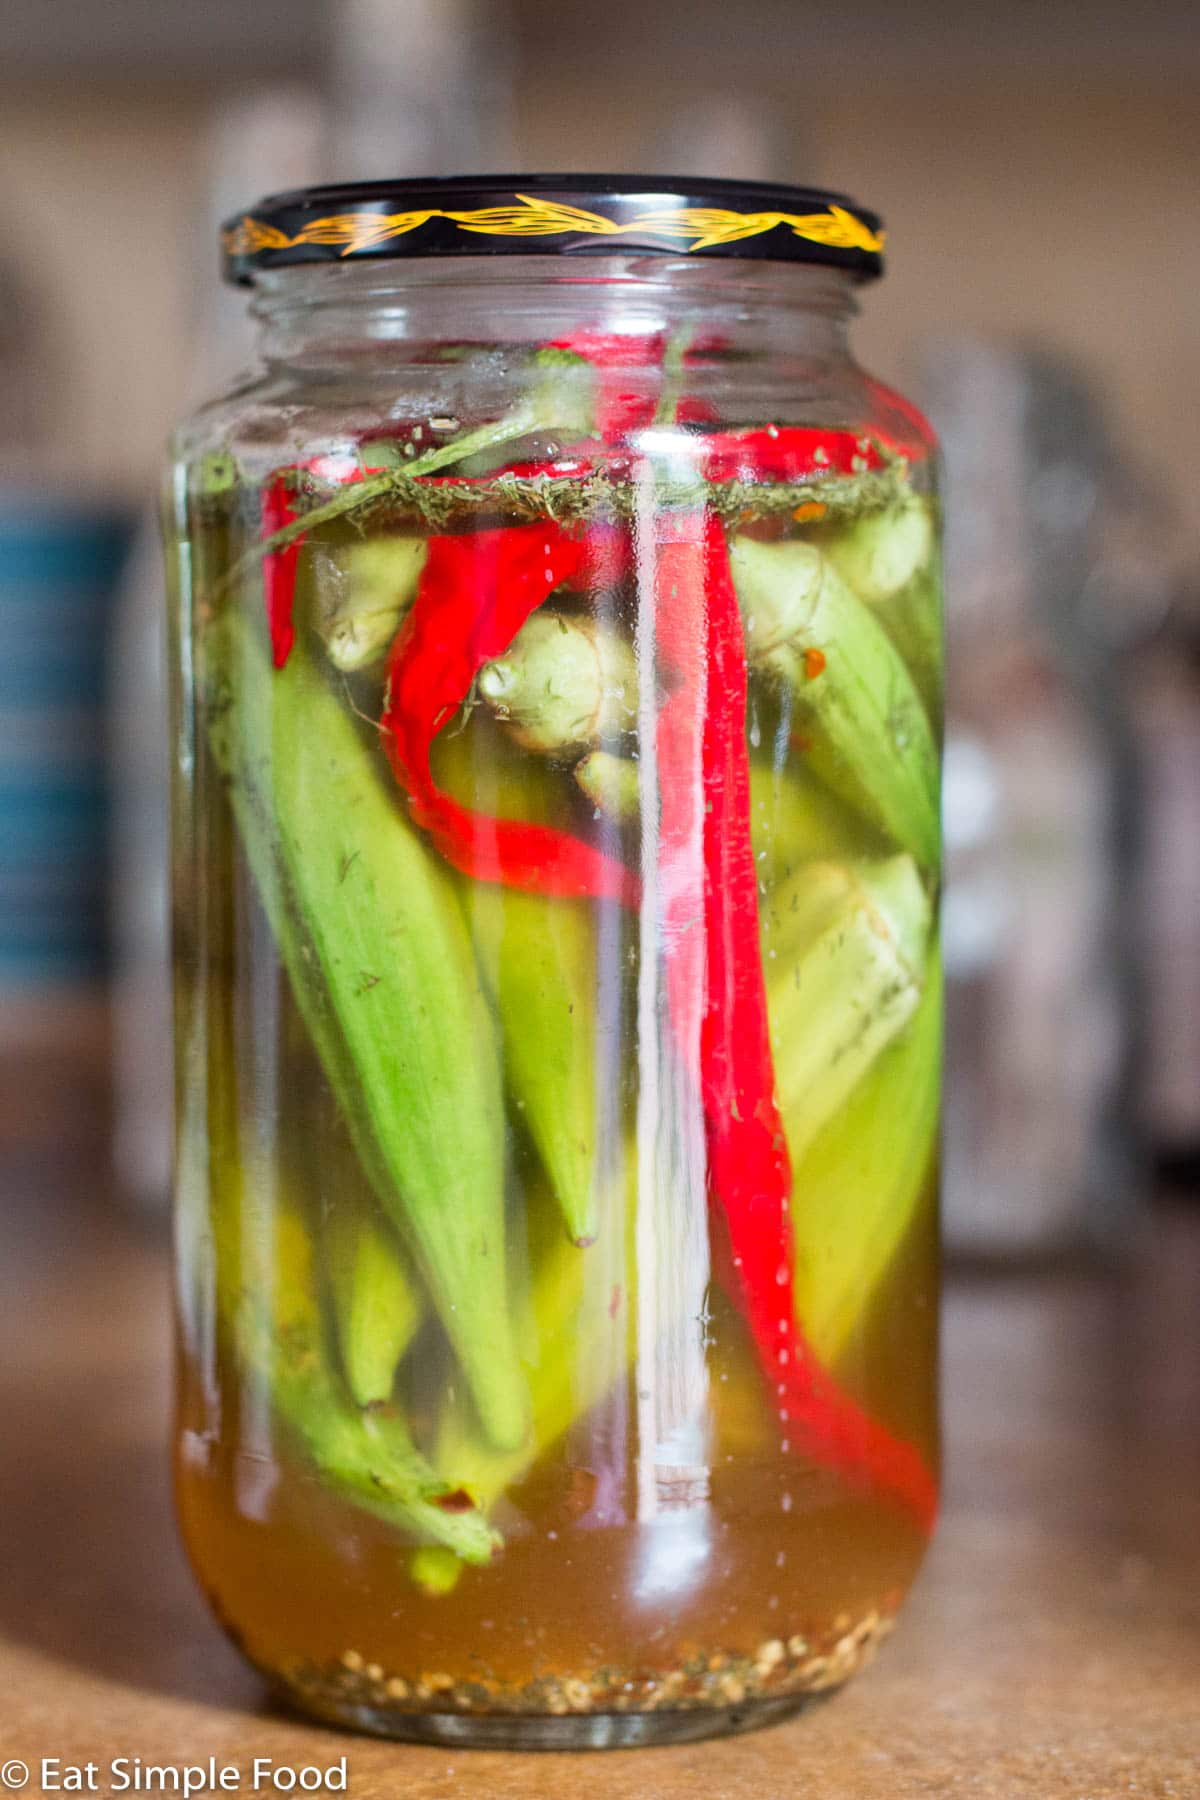 Mason quart jar filled with whole okra and sliced red peppers.